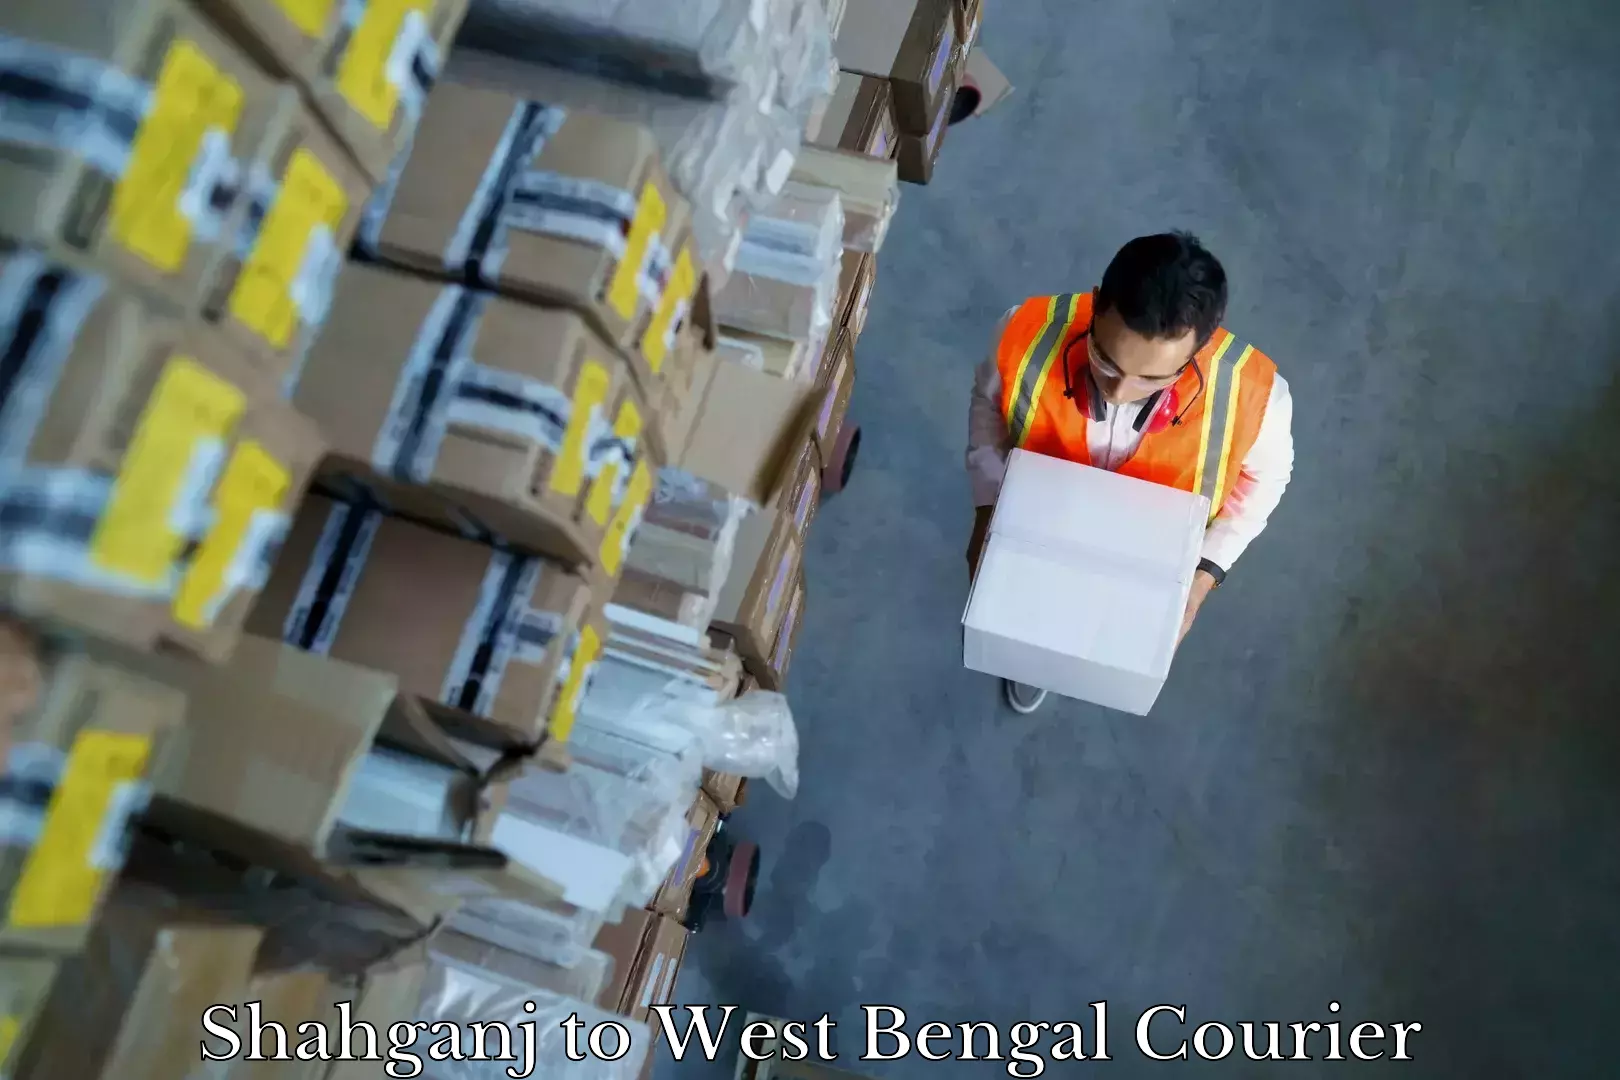 Furniture moving experts Shahganj to West Bengal